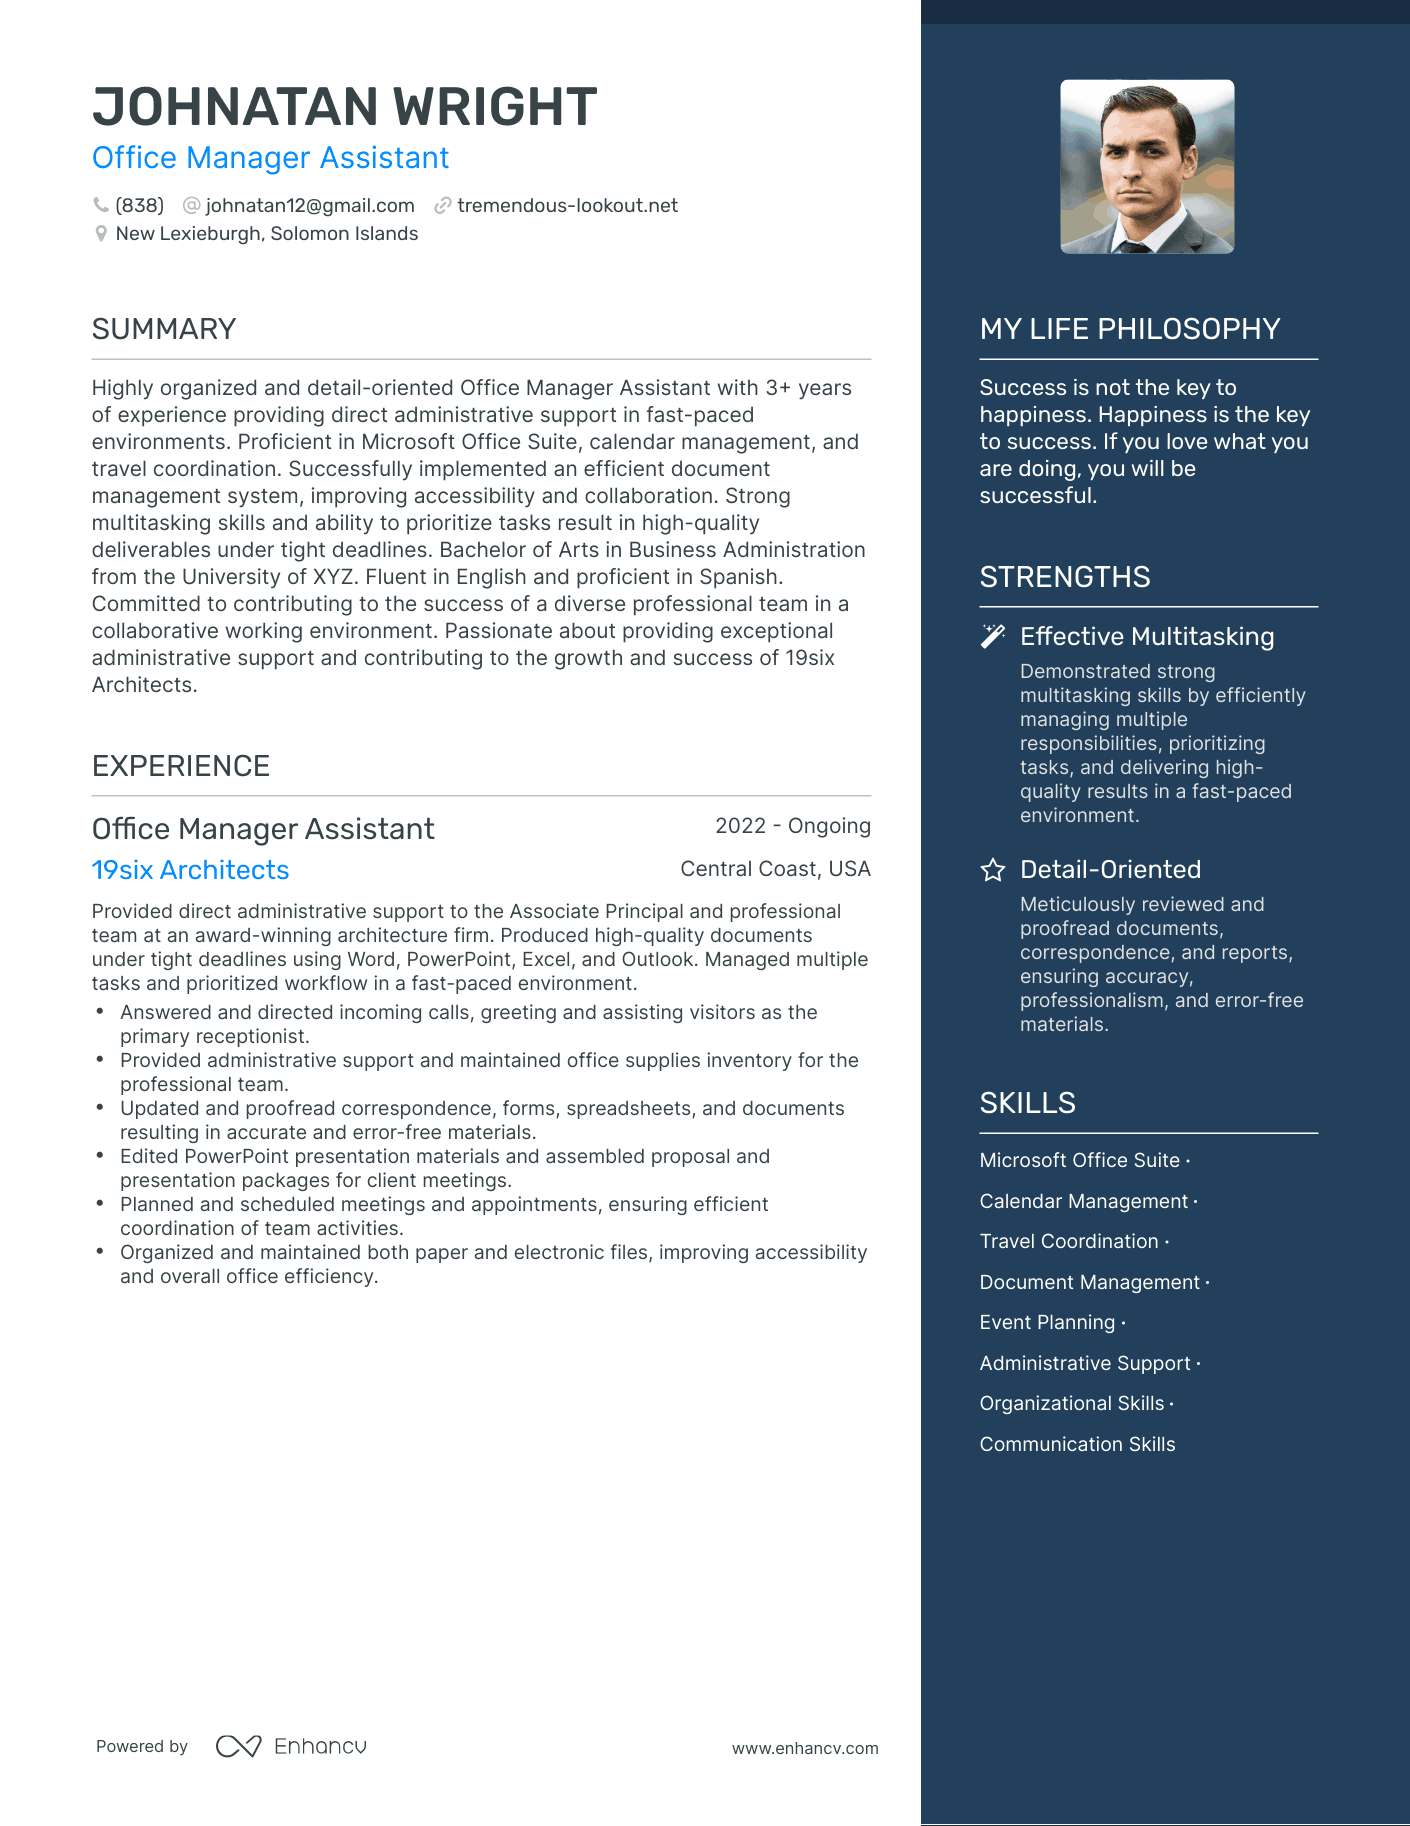 Office Manager Assistant resume example